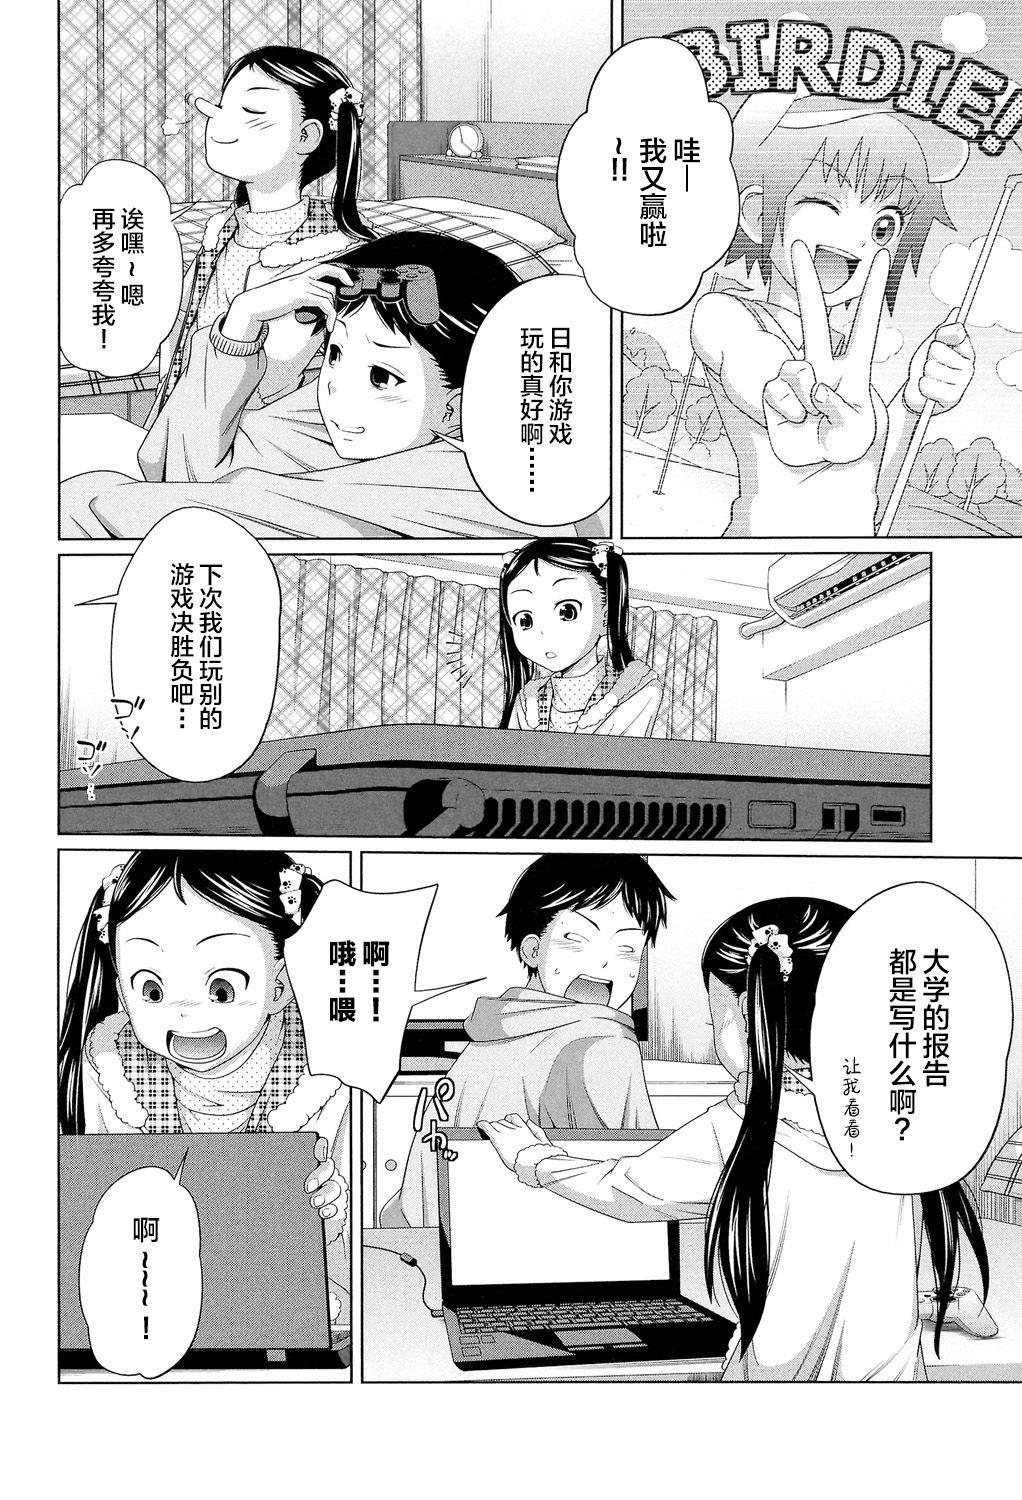 Sharing Imouto Decoration Gays - Page 5